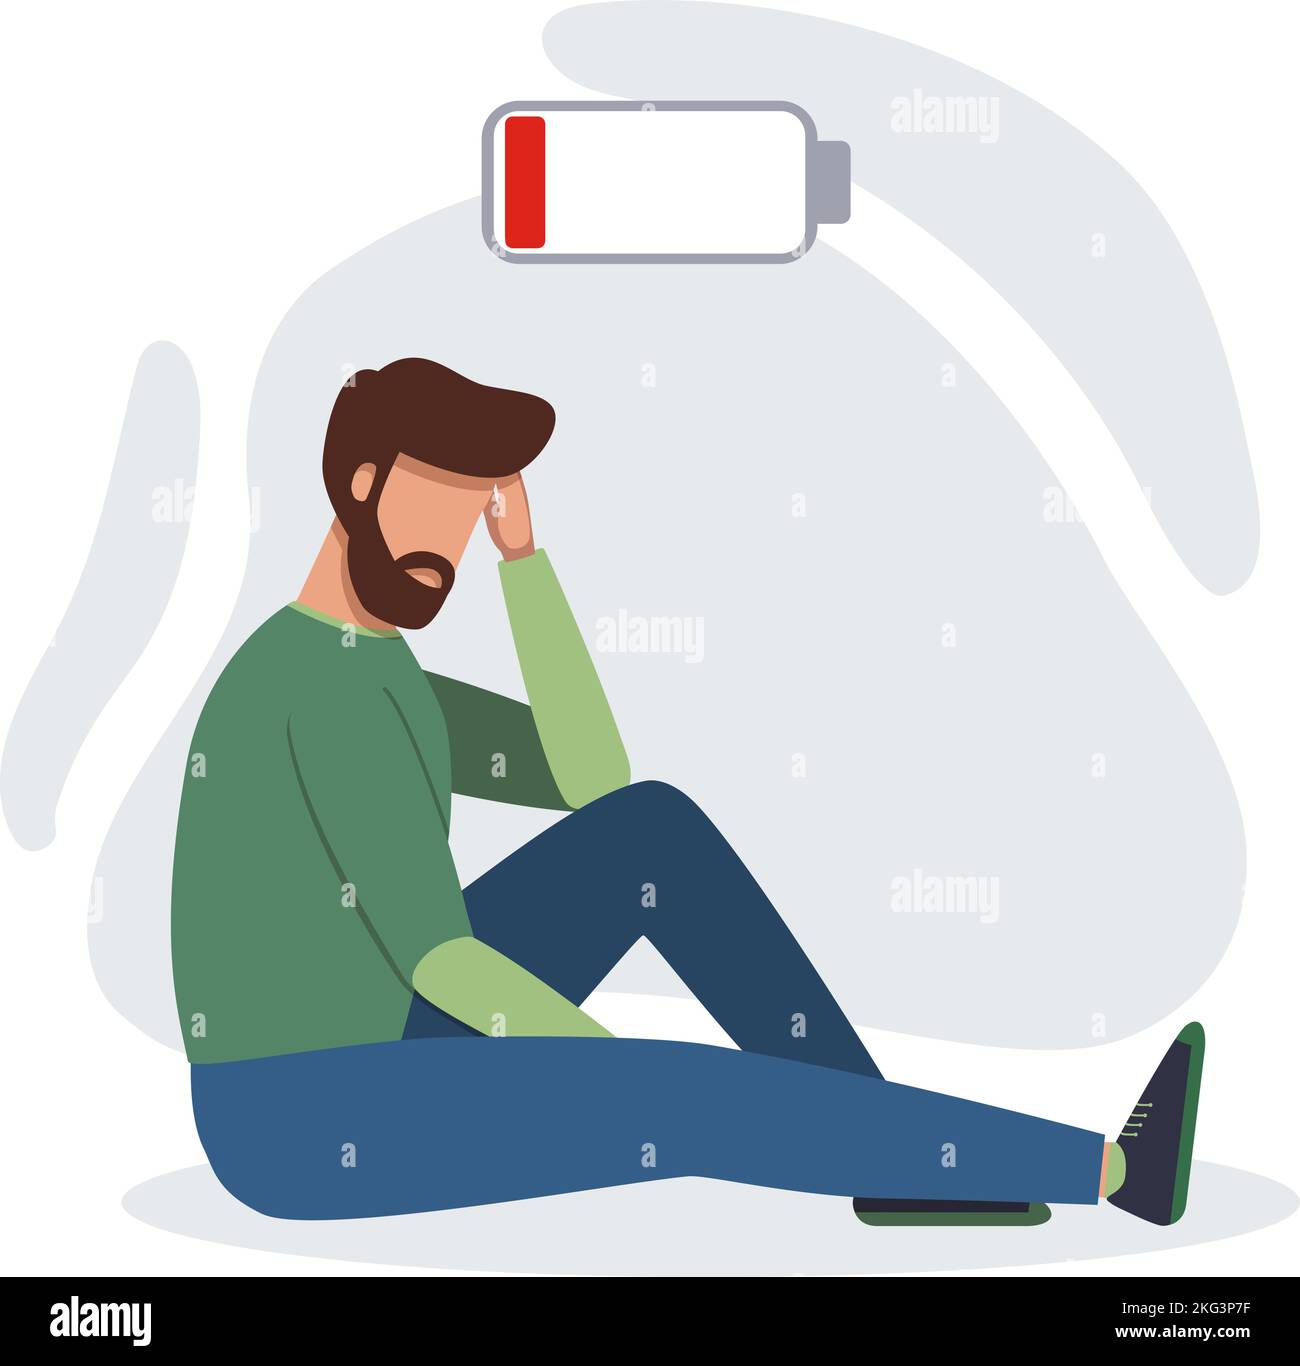 Tired burnout man sitting on the floor. Low energy, burnout or depression concept Stock Vector